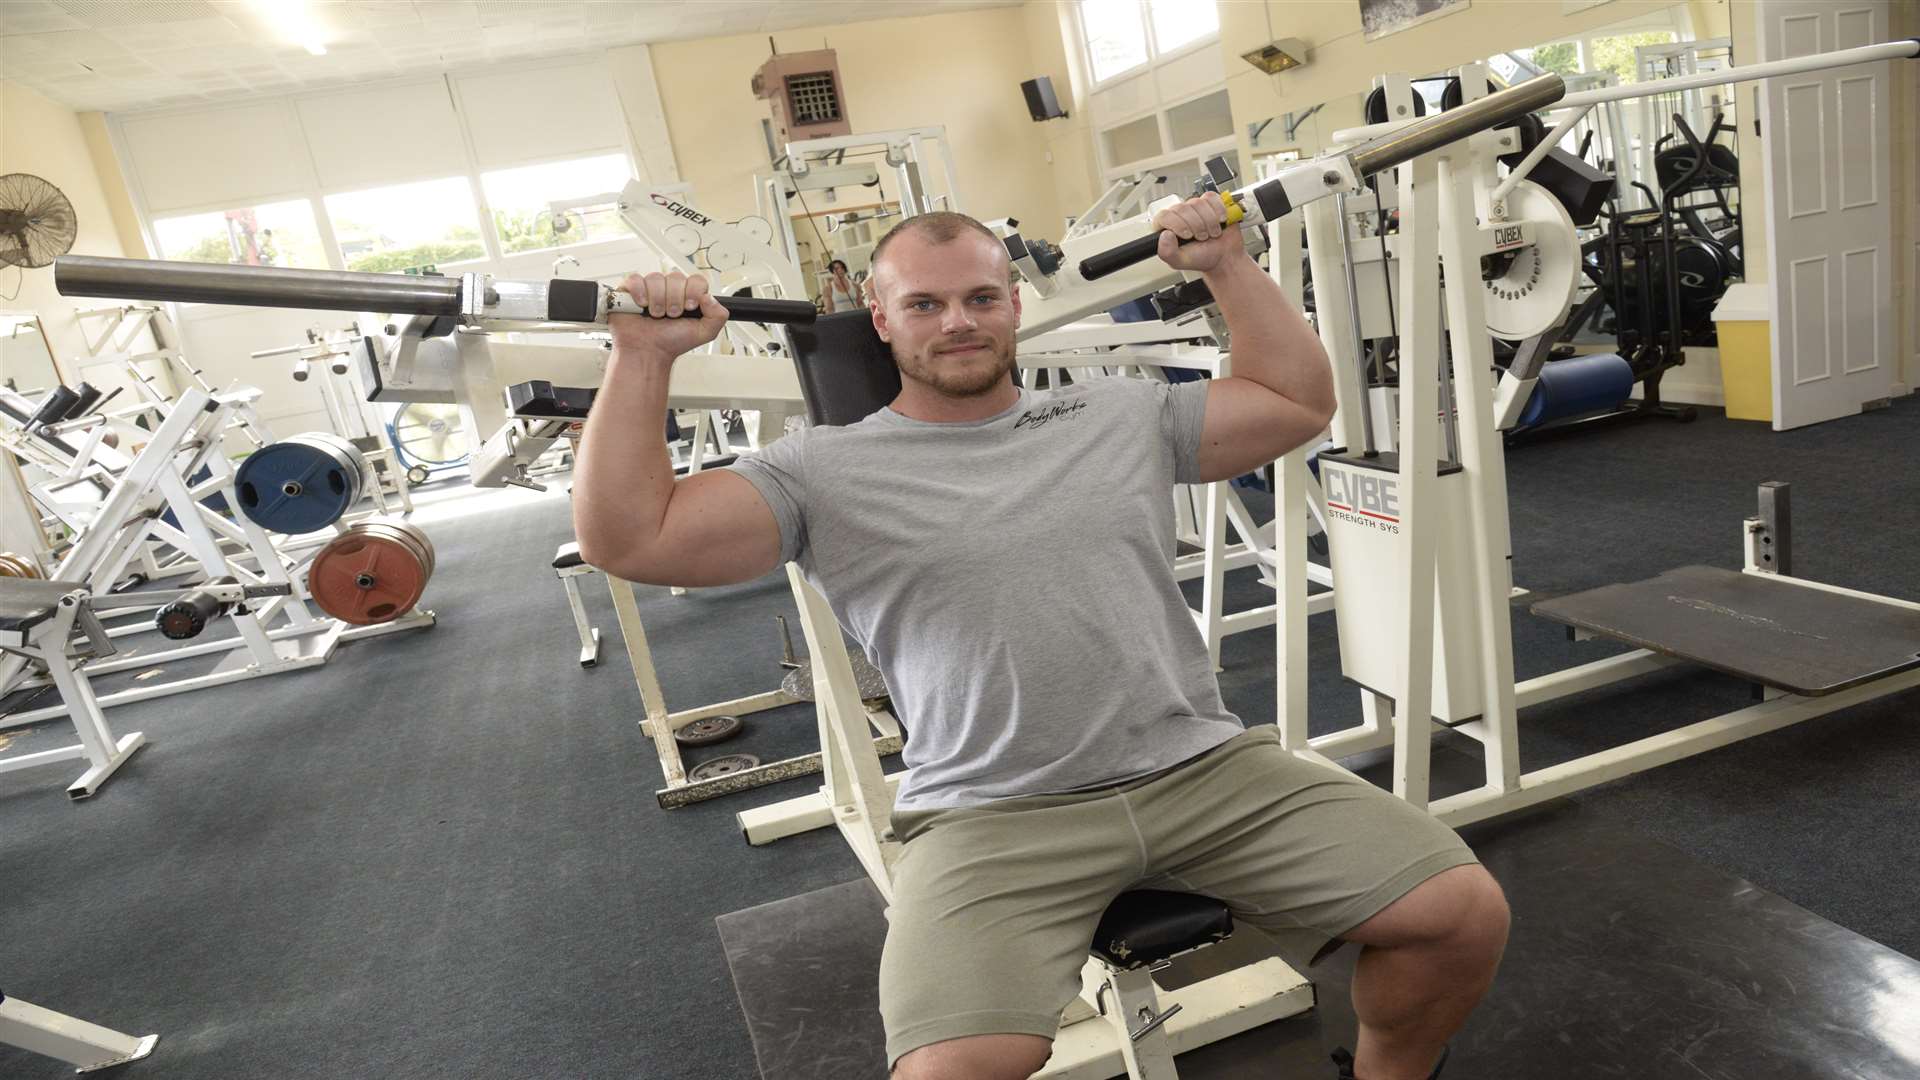 Callum Vine, 22, is looking for aspiring powerlifters and bodybuilders to share his expertise with